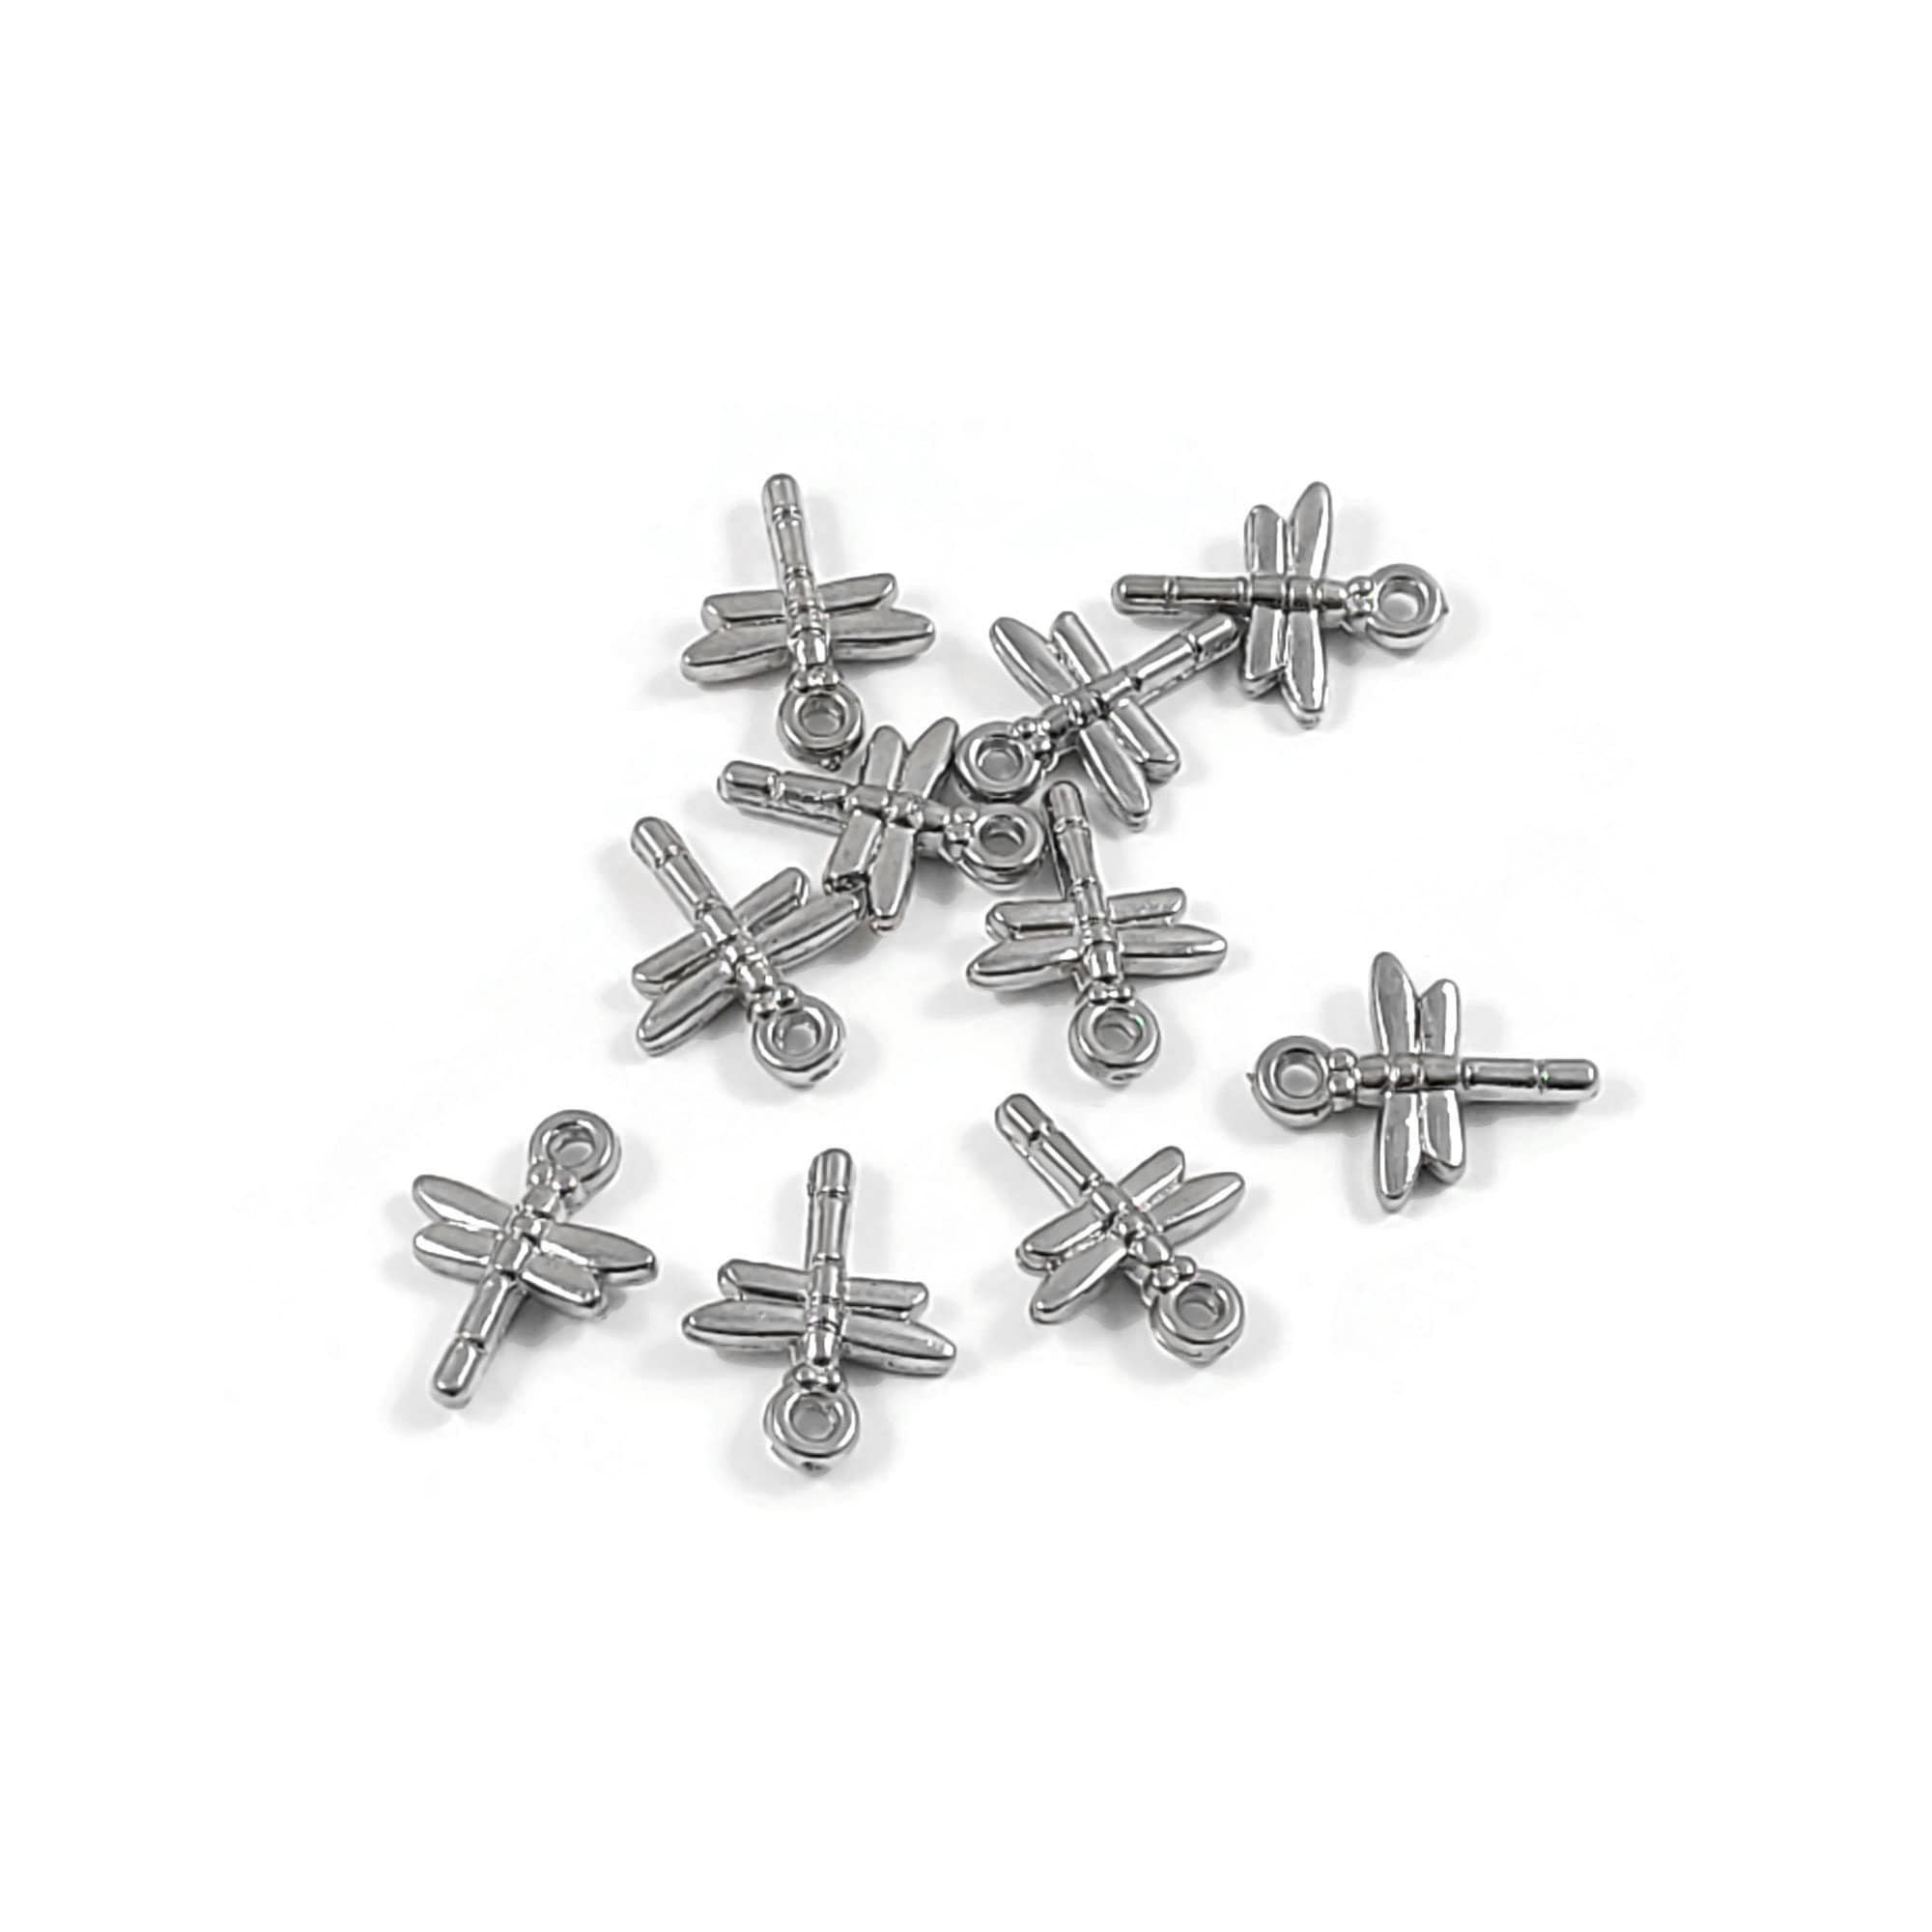 Acrylic dragonfly charms, Silver insect charms, Small pendants for jewelry making, Earring or bracelet charms